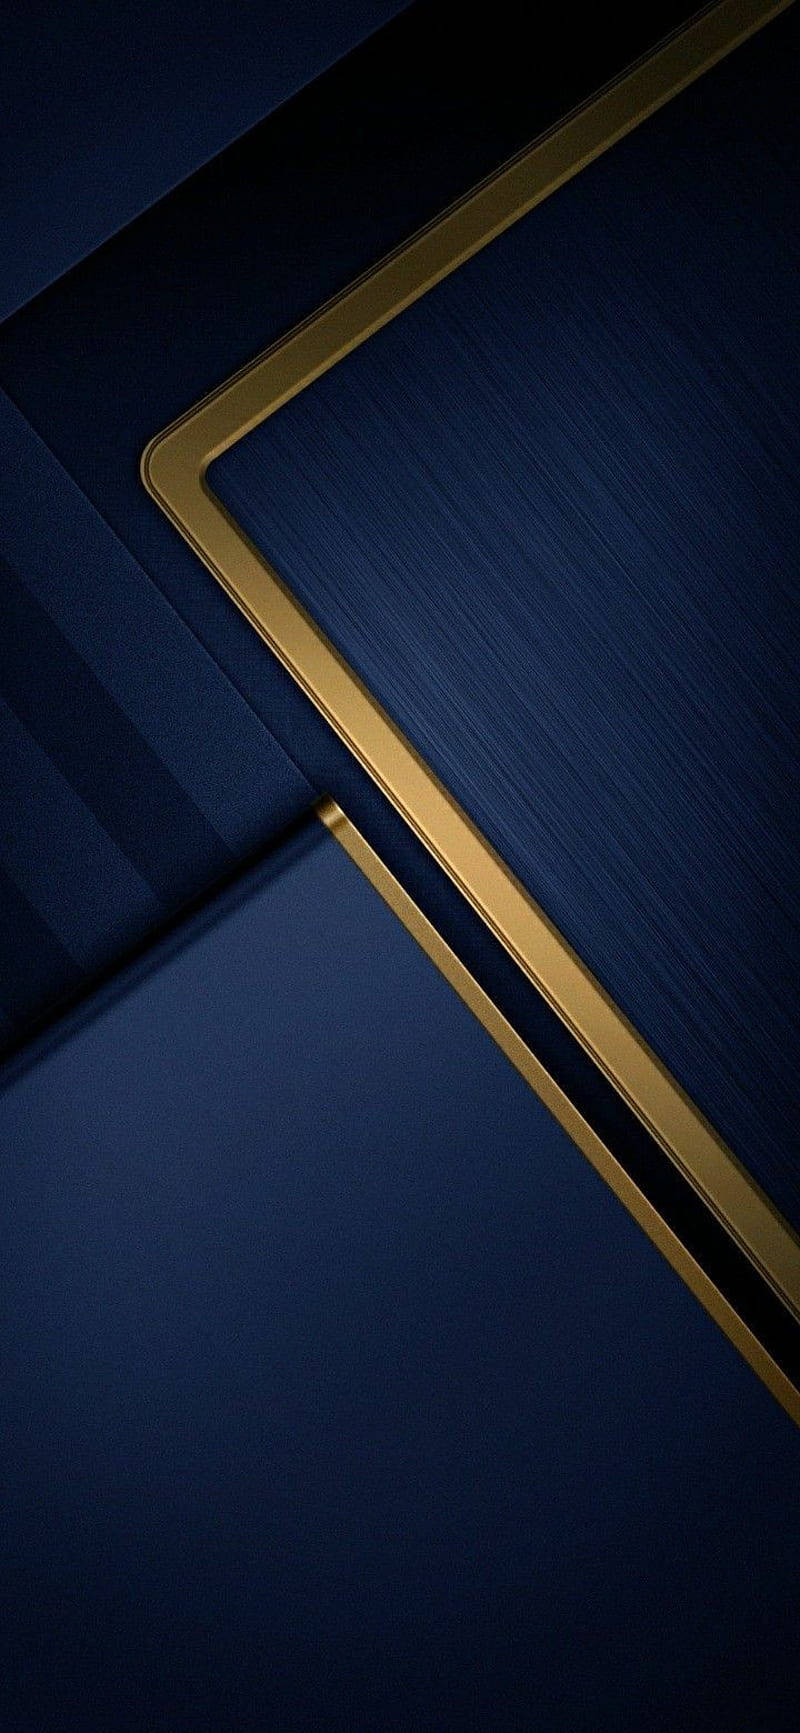 100+] Blue And Gold Wallpapers | Wallpapers.com